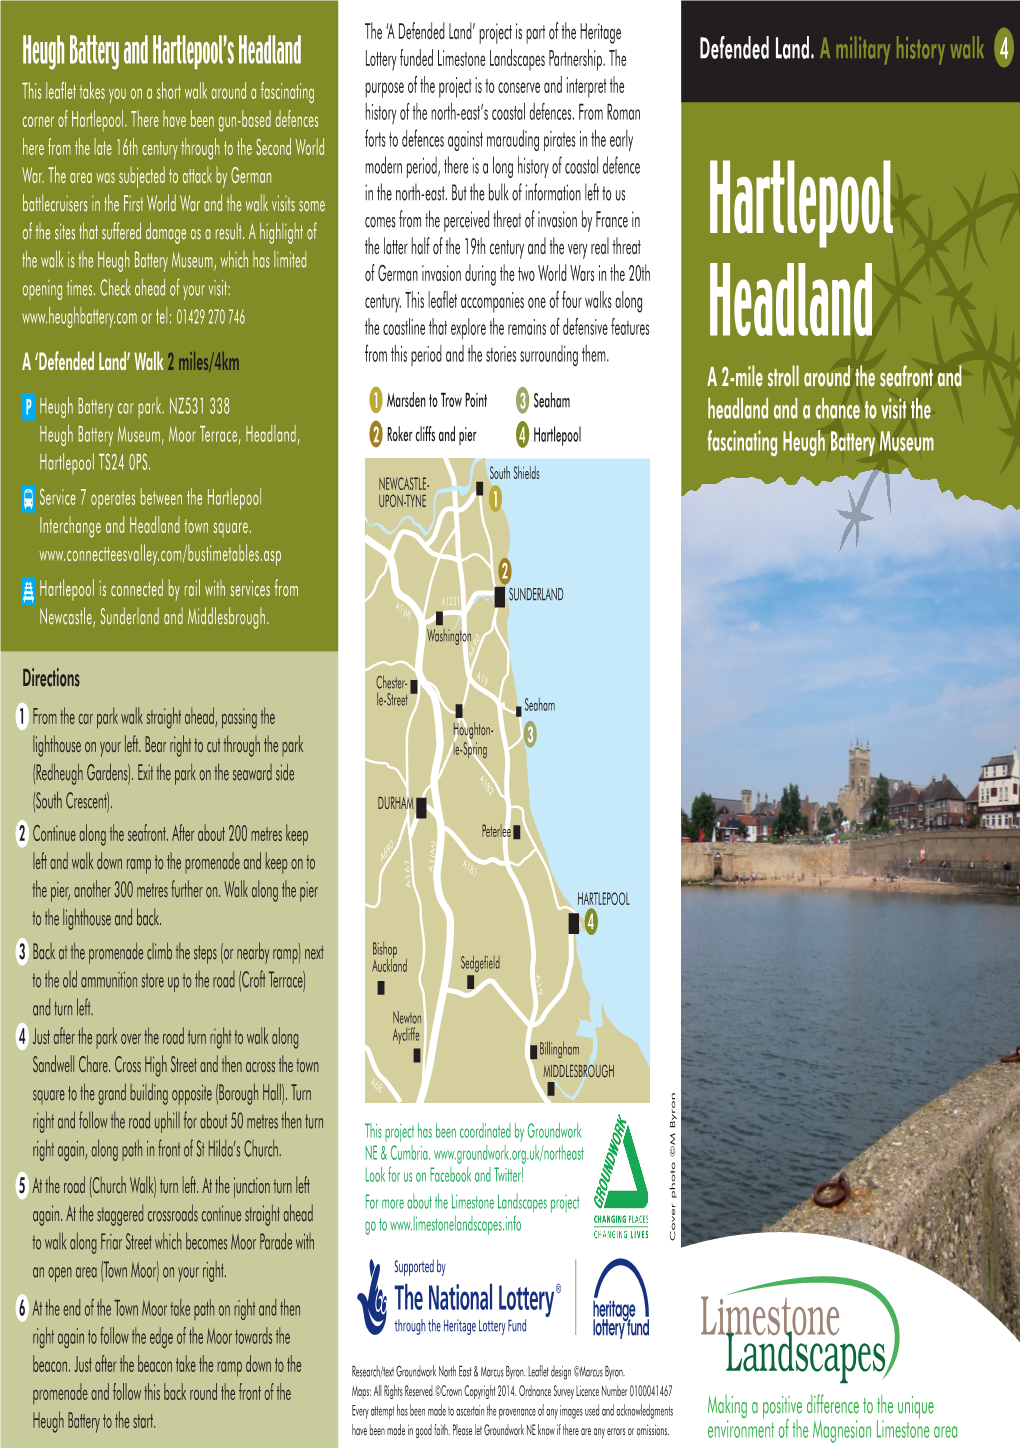 Hartlepool Headland Defended Land Walk.Qxp Layout 1 20/11/2014 11:32 Page 1